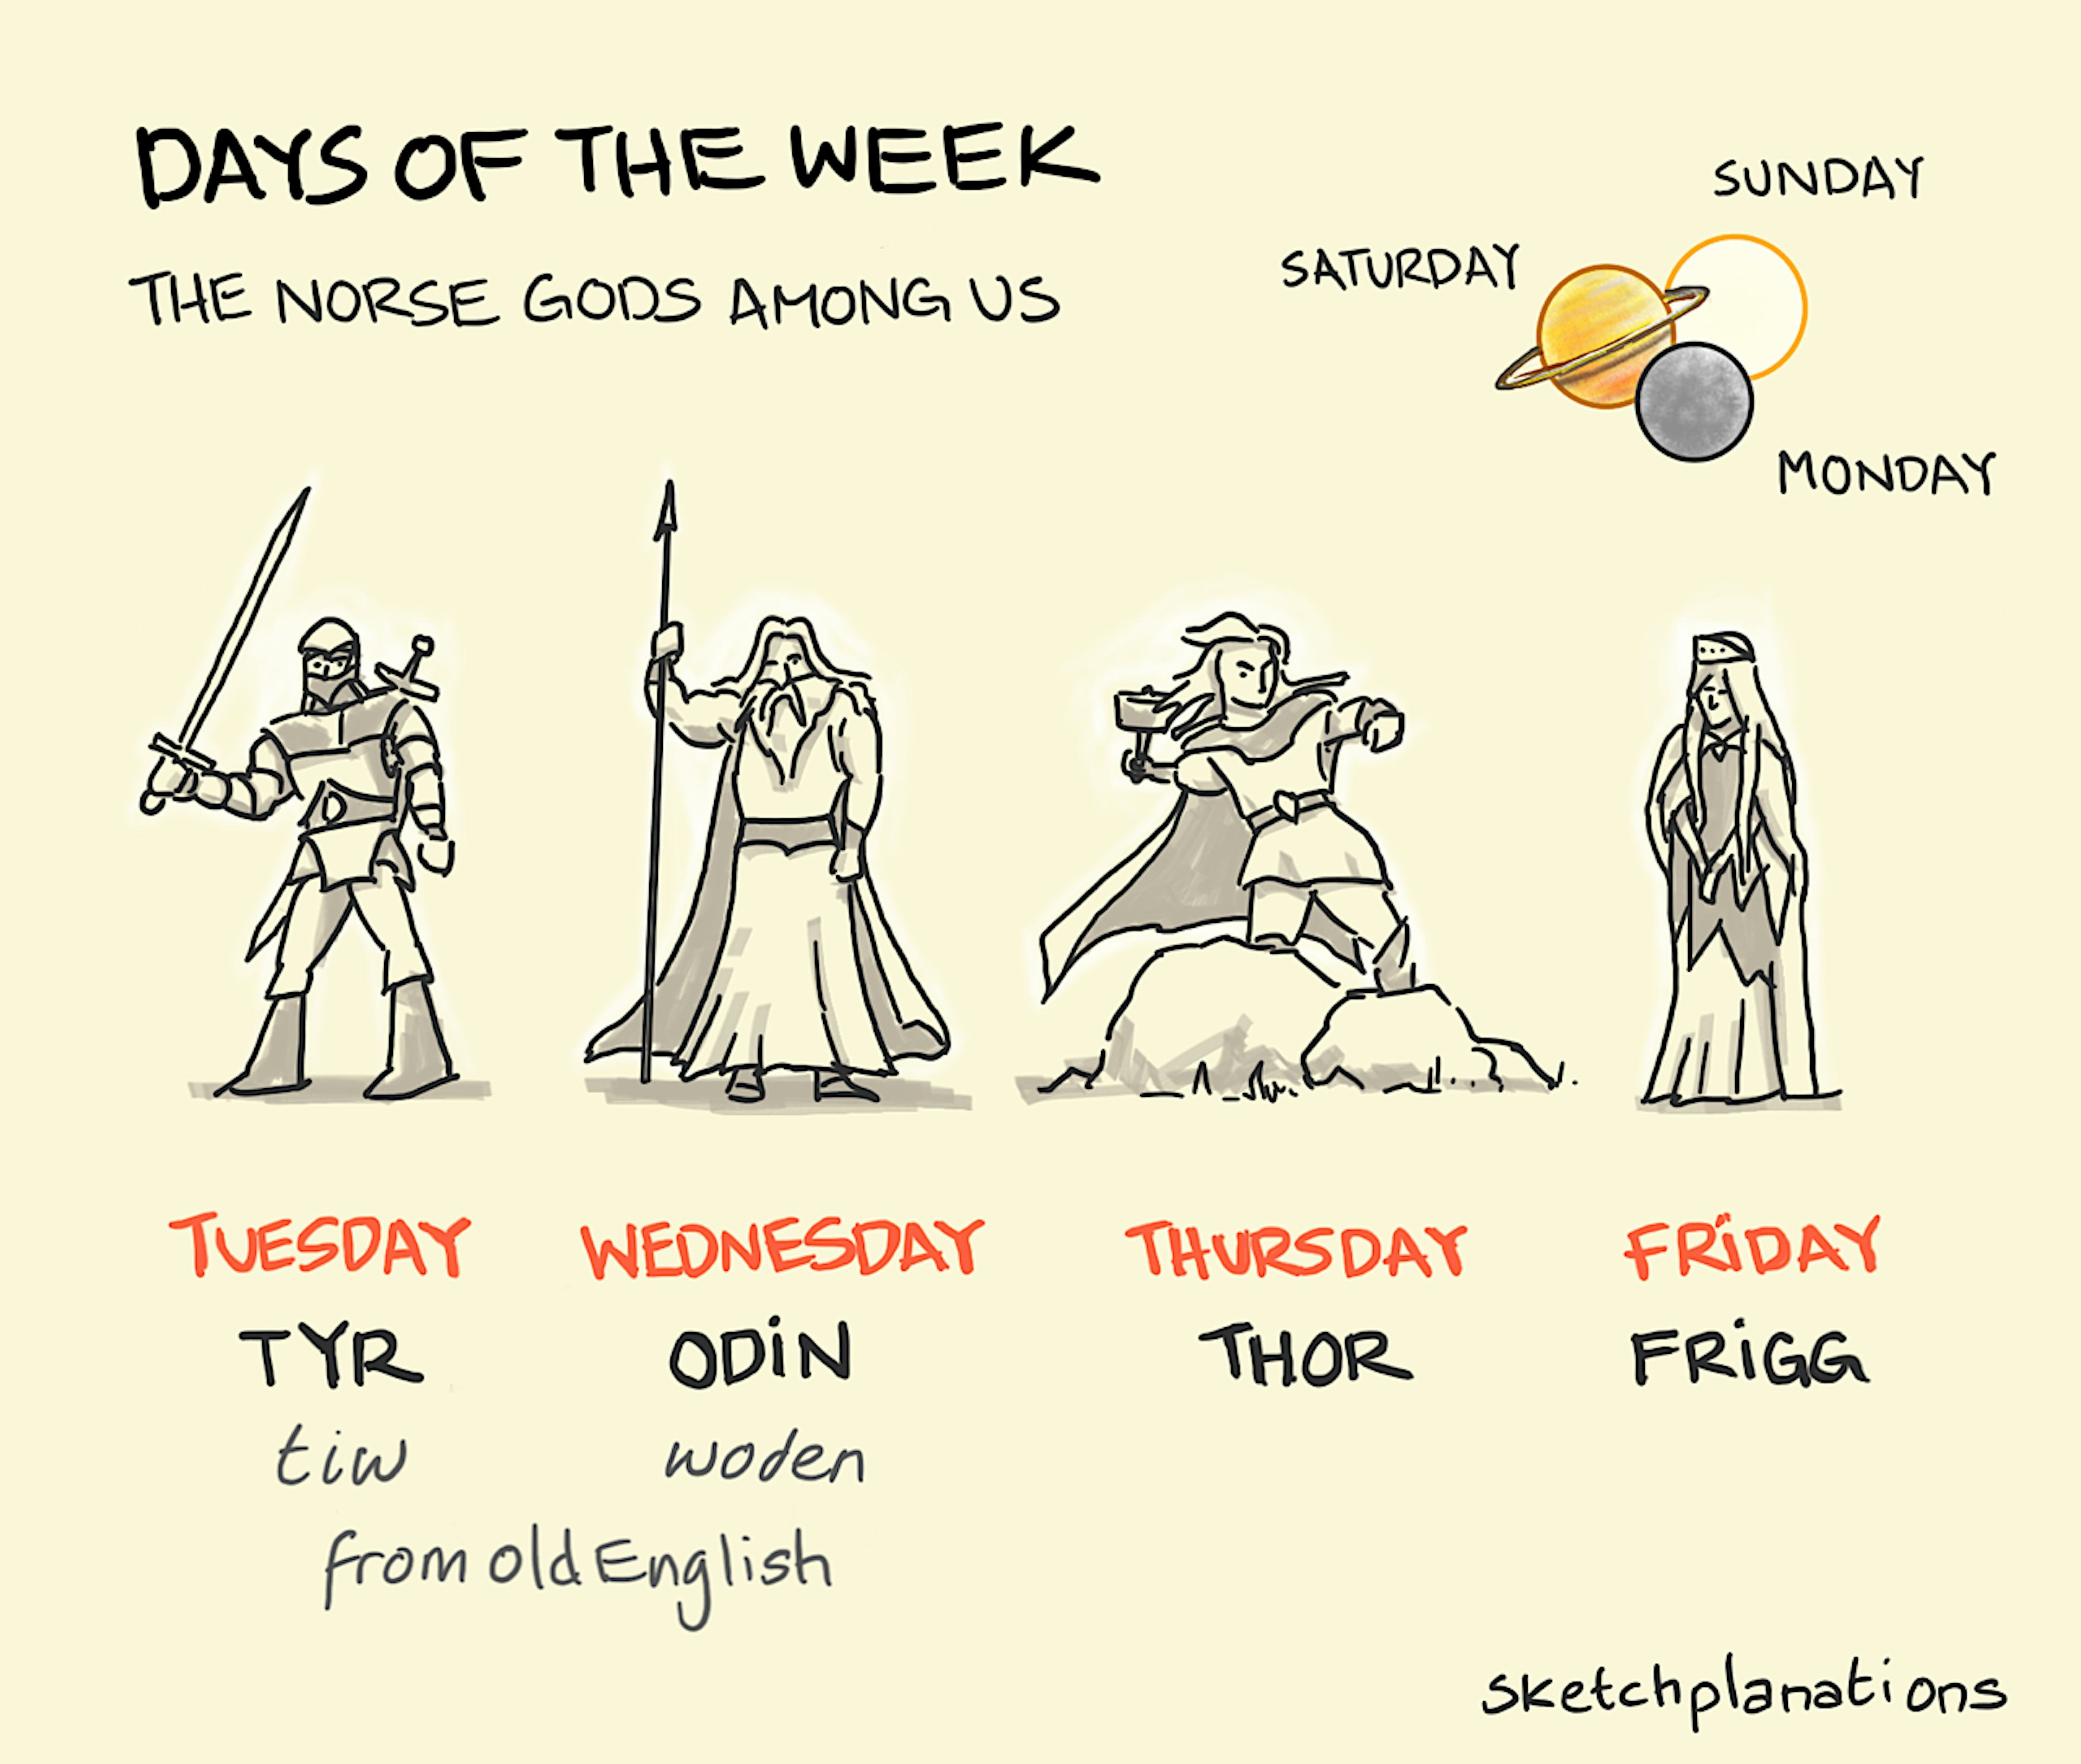 Days of the week - Sketchplanations